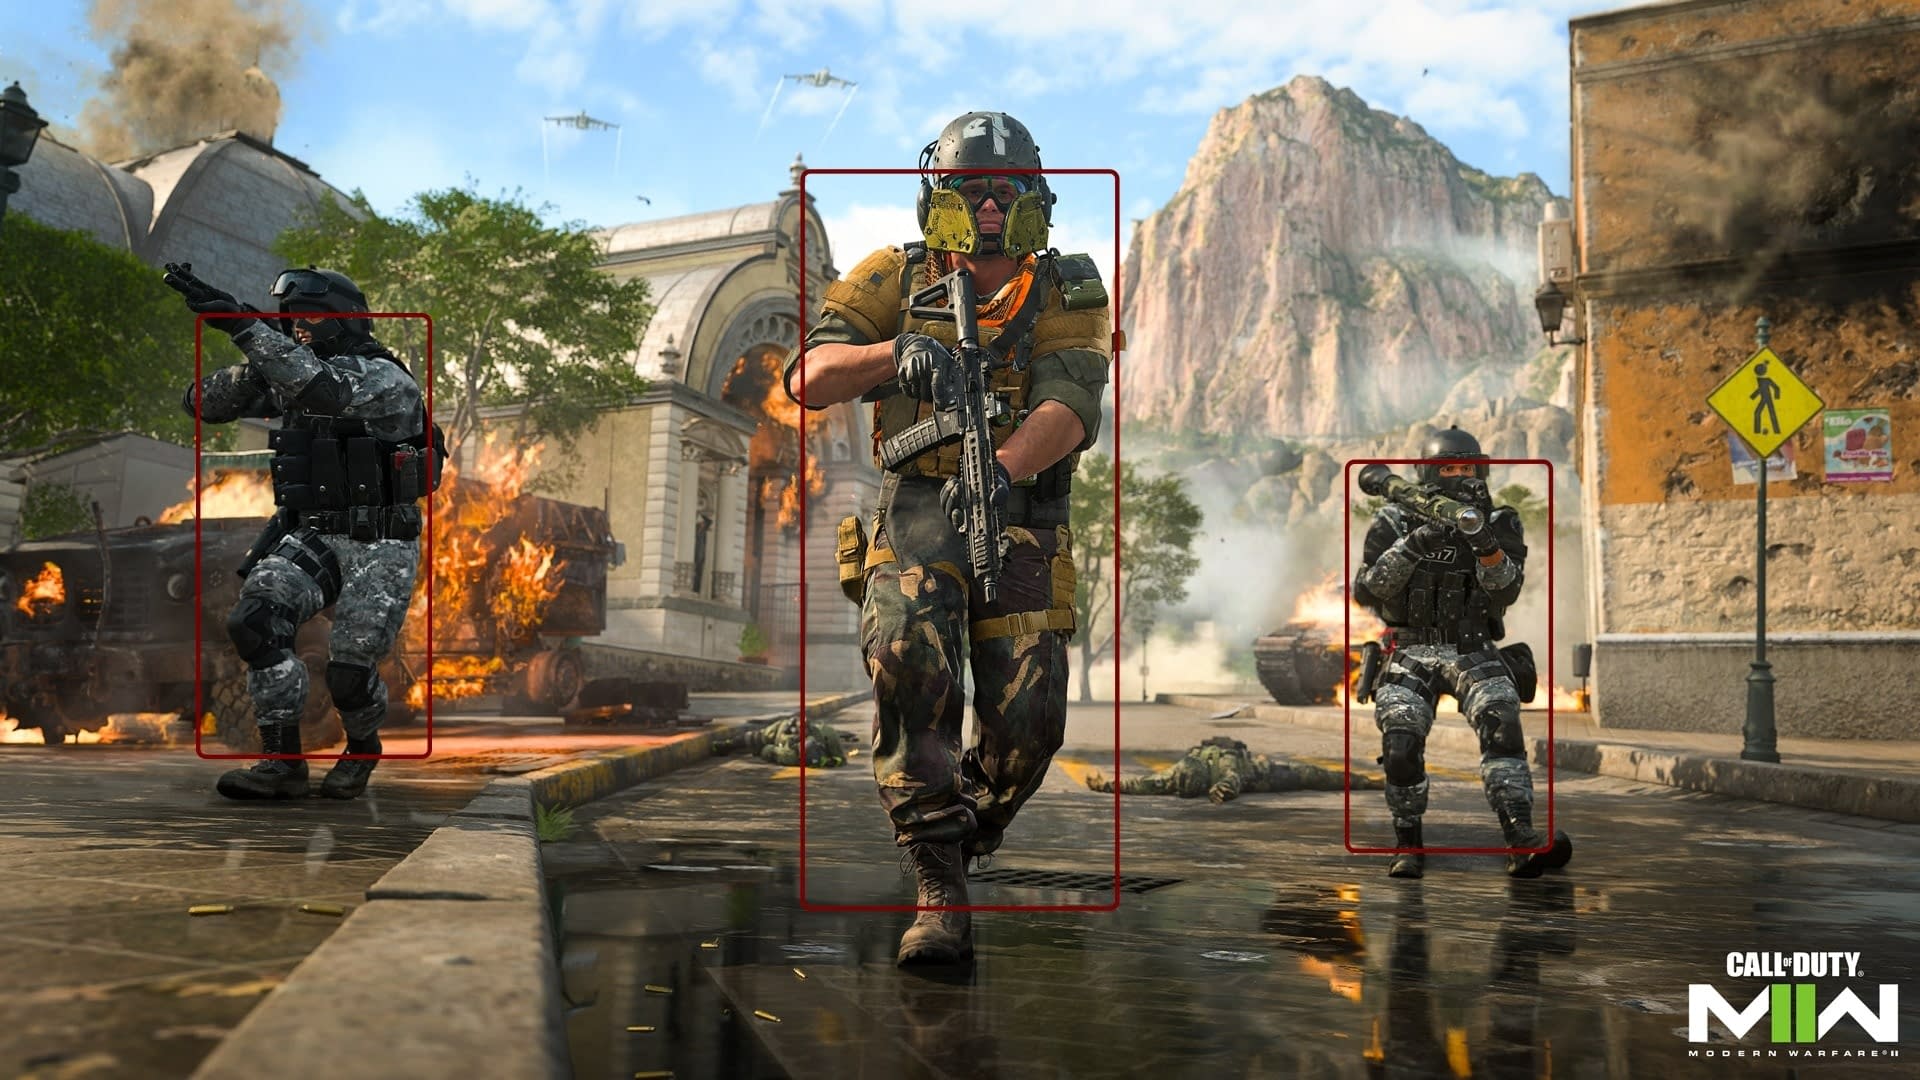 Call of Duty’s Cheat System Remoteed 14,000 Cheats a day